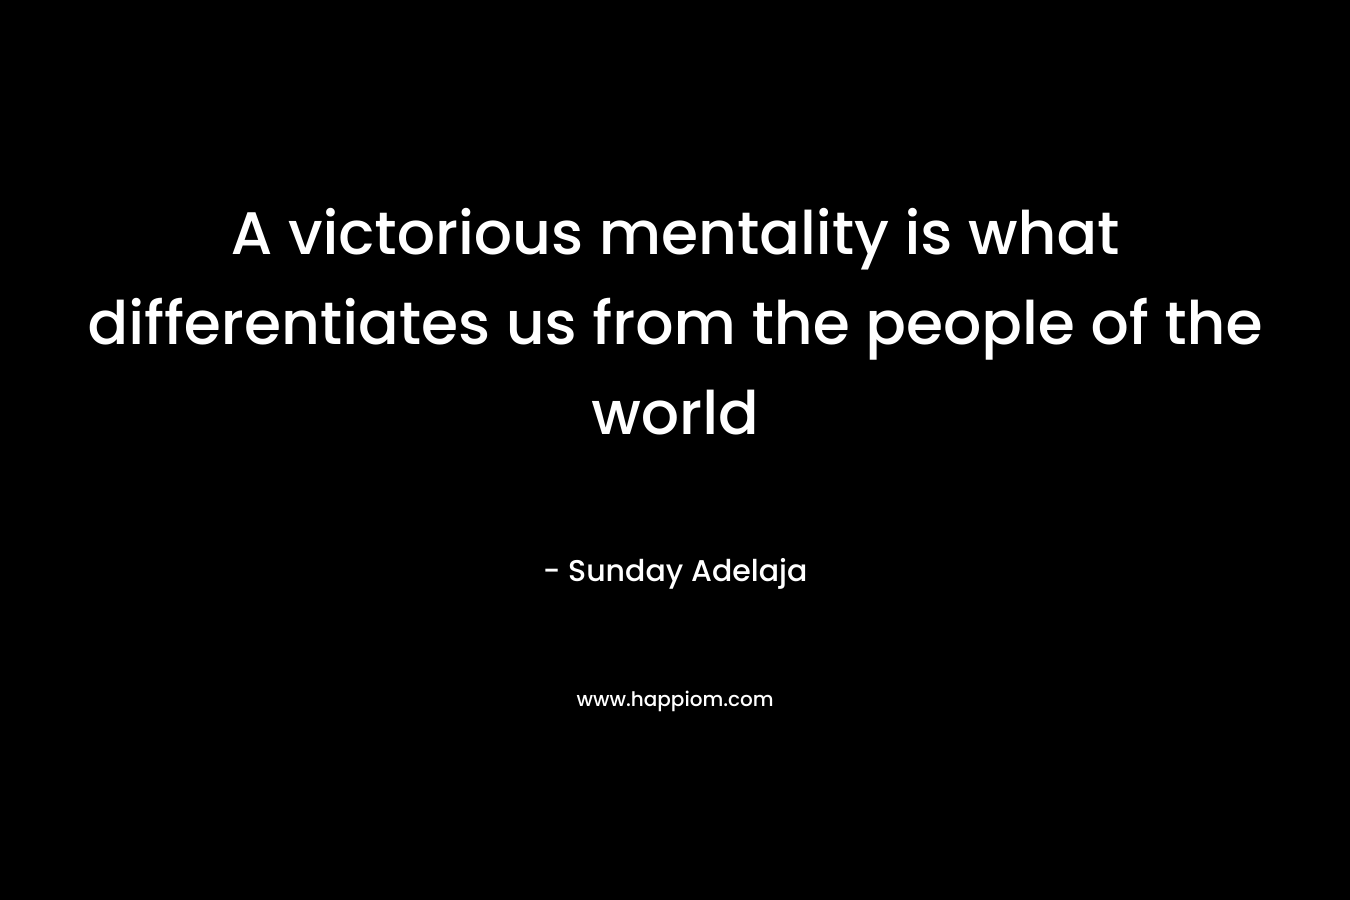 A victorious mentality is what differentiates us from the people of the world